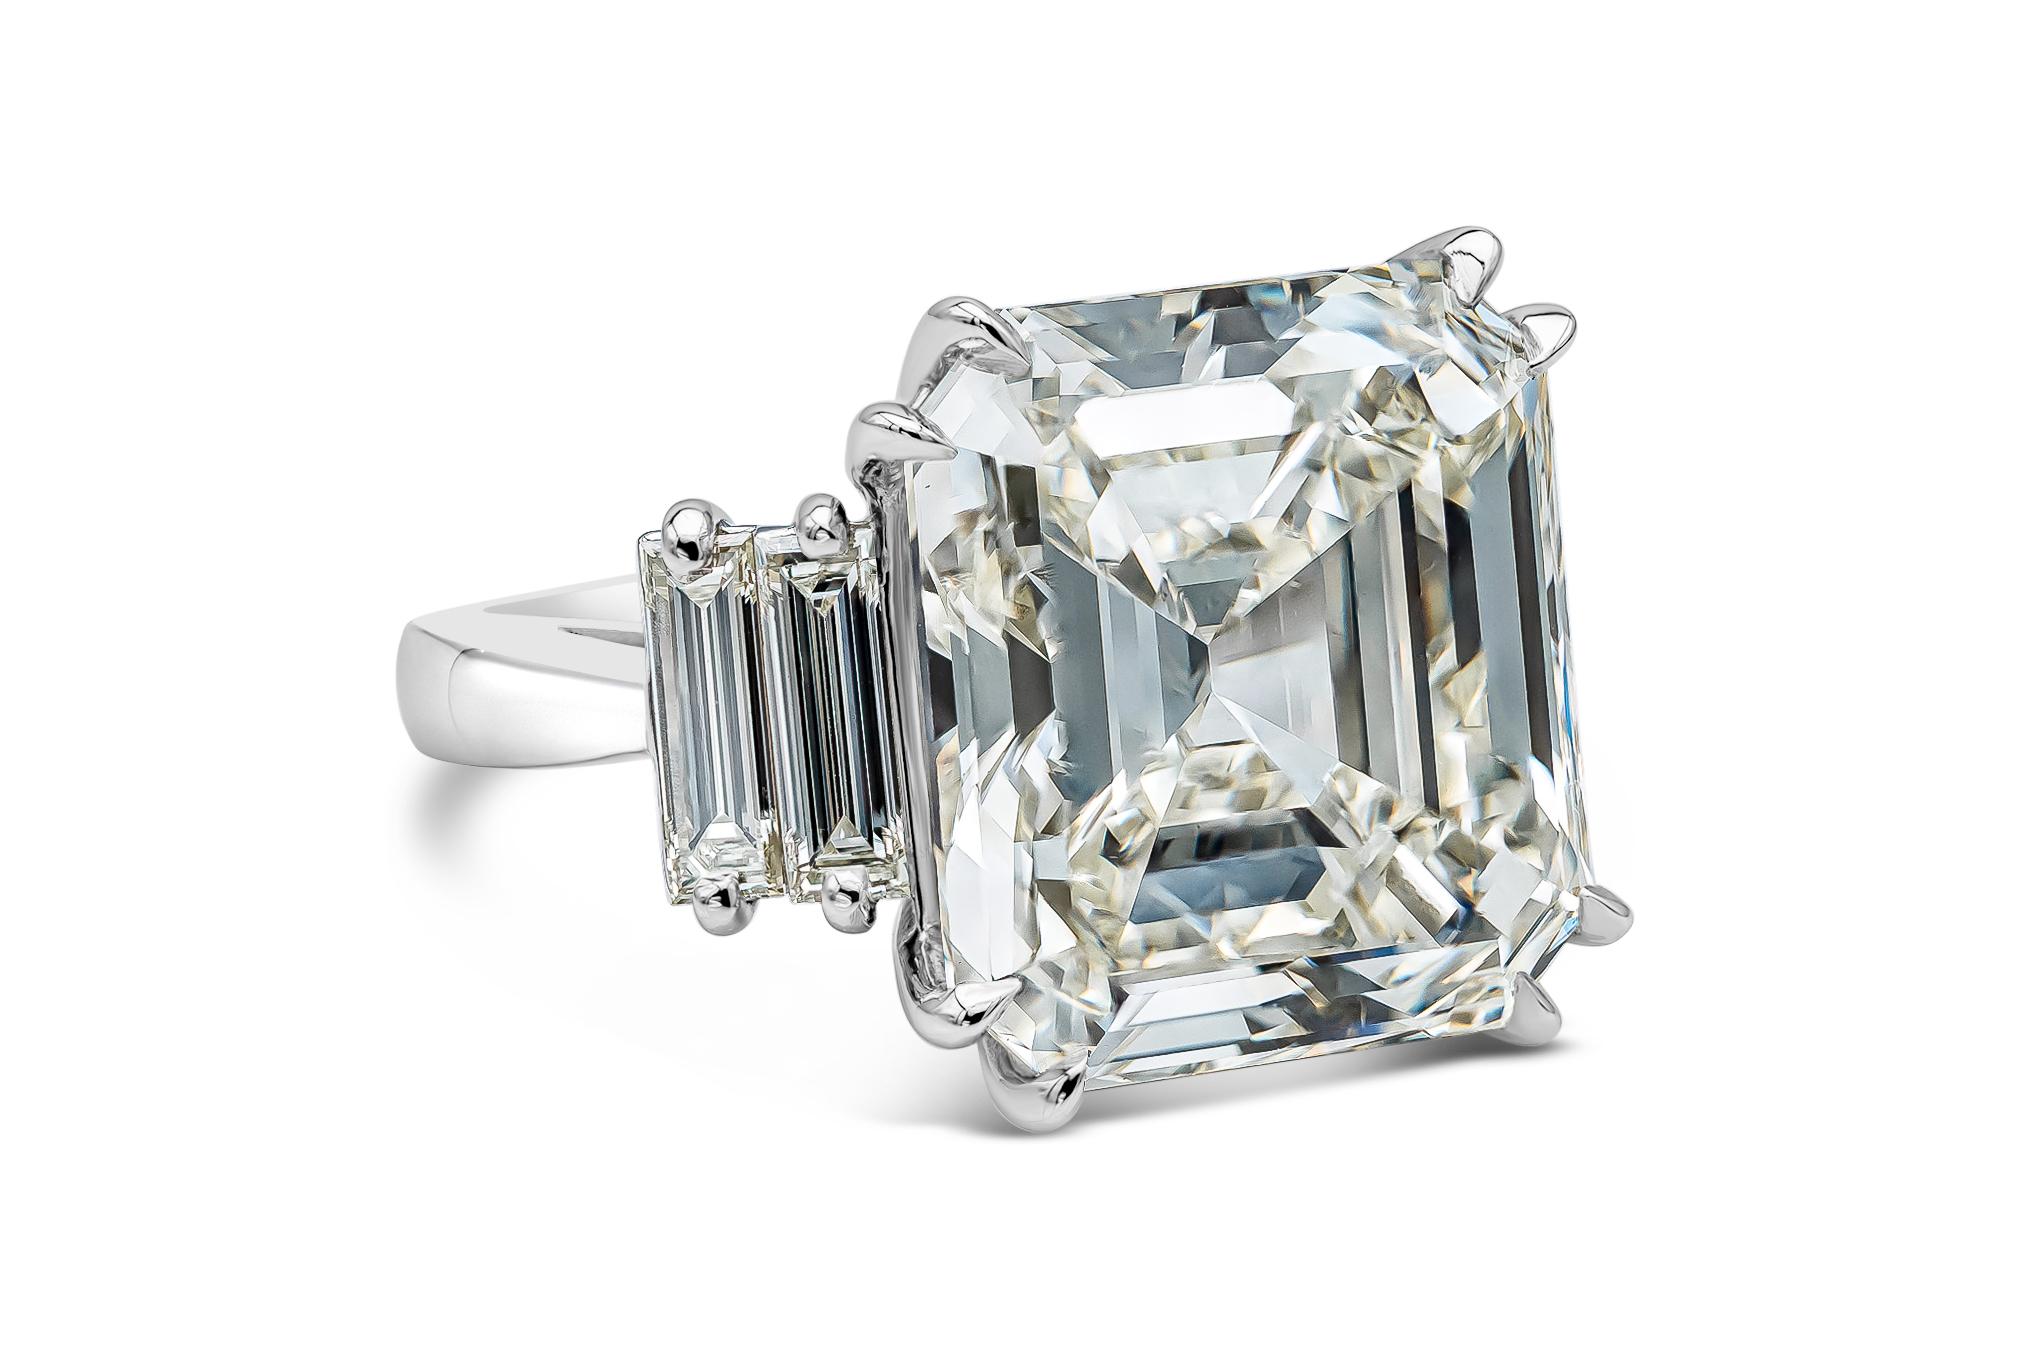 Elegant and well crafted engagement ring showcasing a square emerald cut weighing 18.75 carats, flanked by four elongated baguette cut diamonds weighing 1.43 carats total. Set in a polished platinum mounting. EGL USA certified the cushion cut as J